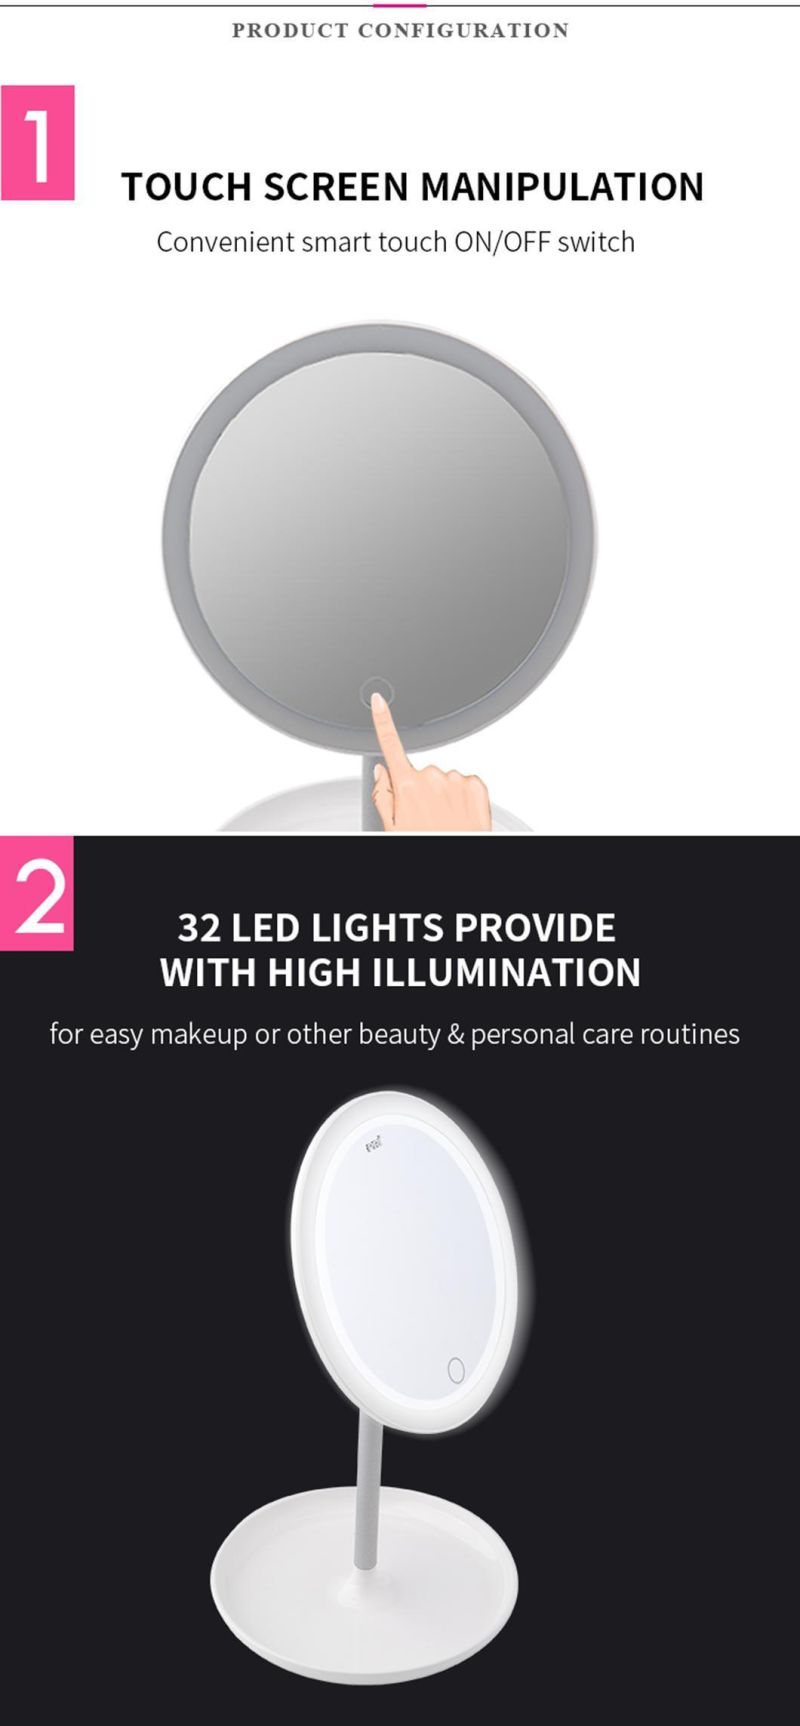 Pritech Custom Cosmetic LED Vanity Table Makeup Mirror with Light